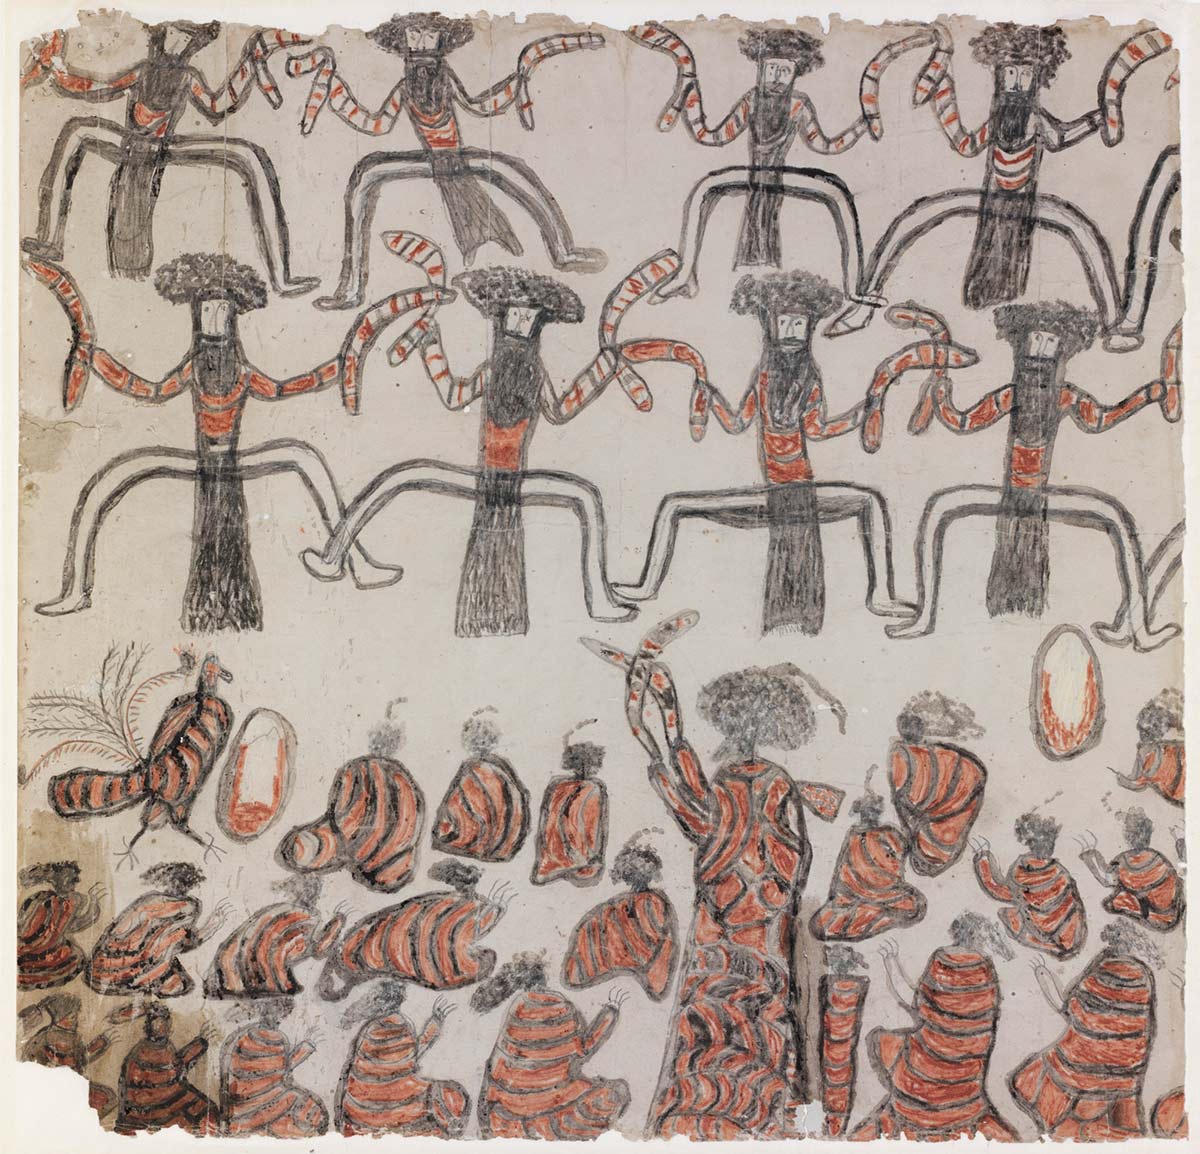 A pencil, pigment and watercolour drawing in a predominantly red and black palette depicts rows of figures dancing and sitting. The figures in the upper section are holding red striped boomerangs and have splayed legs. The figures in the lower section are sitting with hands raised, and surround a standing figure holding two decorated boomerangs crossed. At the left of the picture is a bird-like figure with a tail similar to a lyrebird, and on the right of the picture is another partly coloured oval shape.